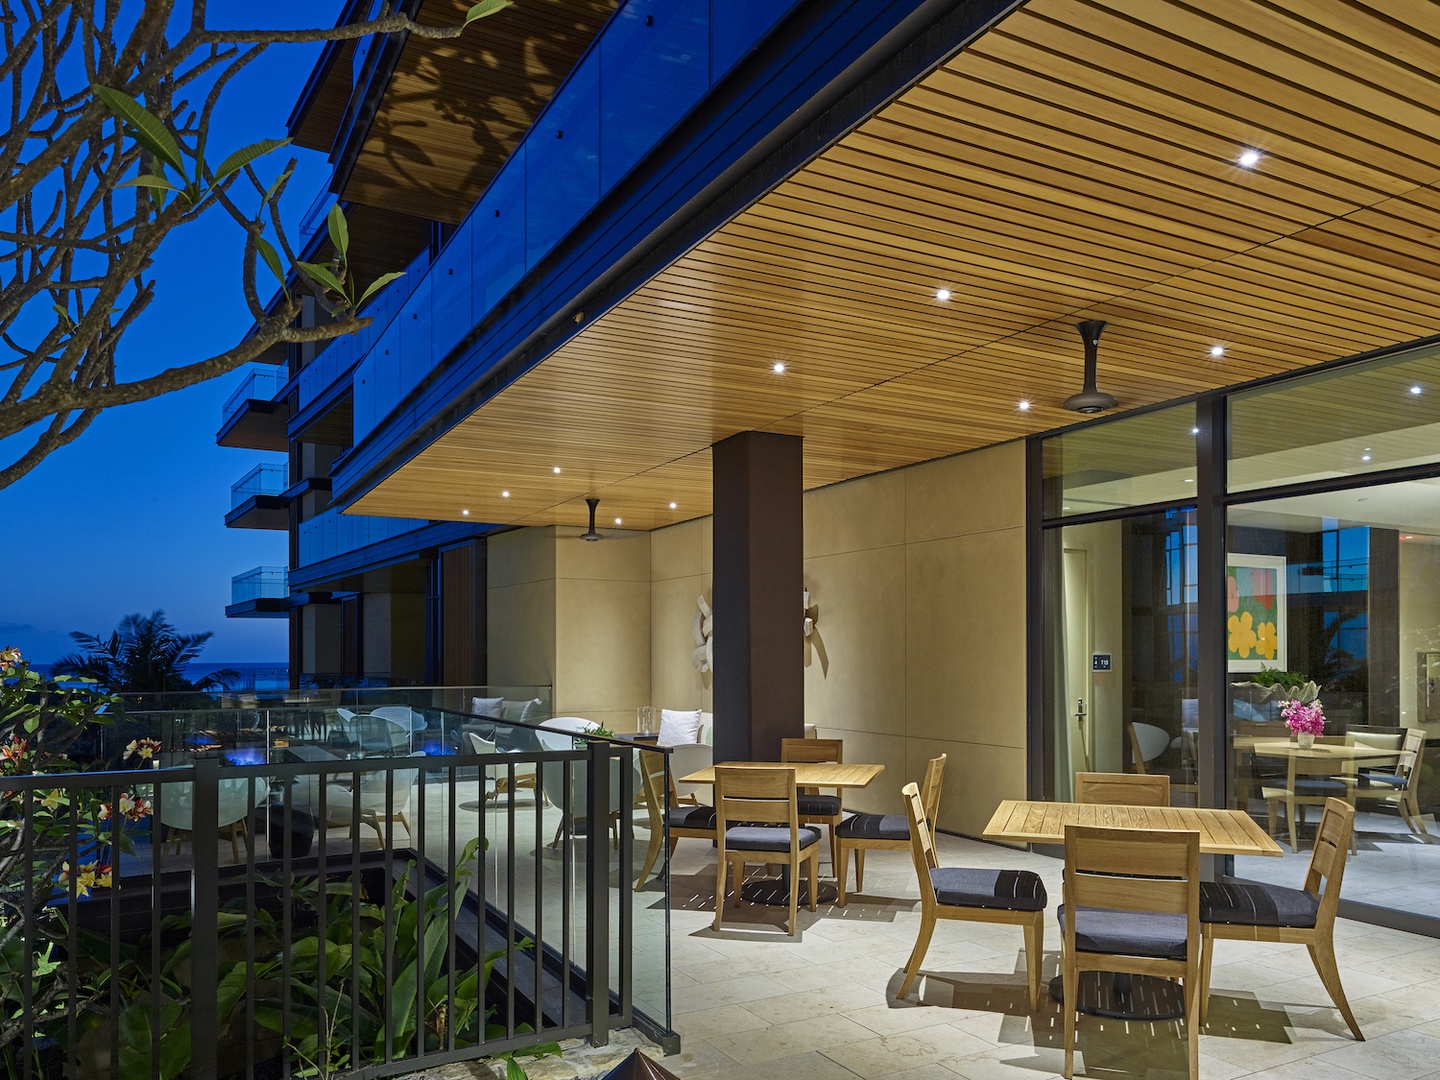 Honolulu Vacation Rentals, Park Lane Sky Resort - Catering kitchen, private dining, indoor/outdoor lounge, and wet bar